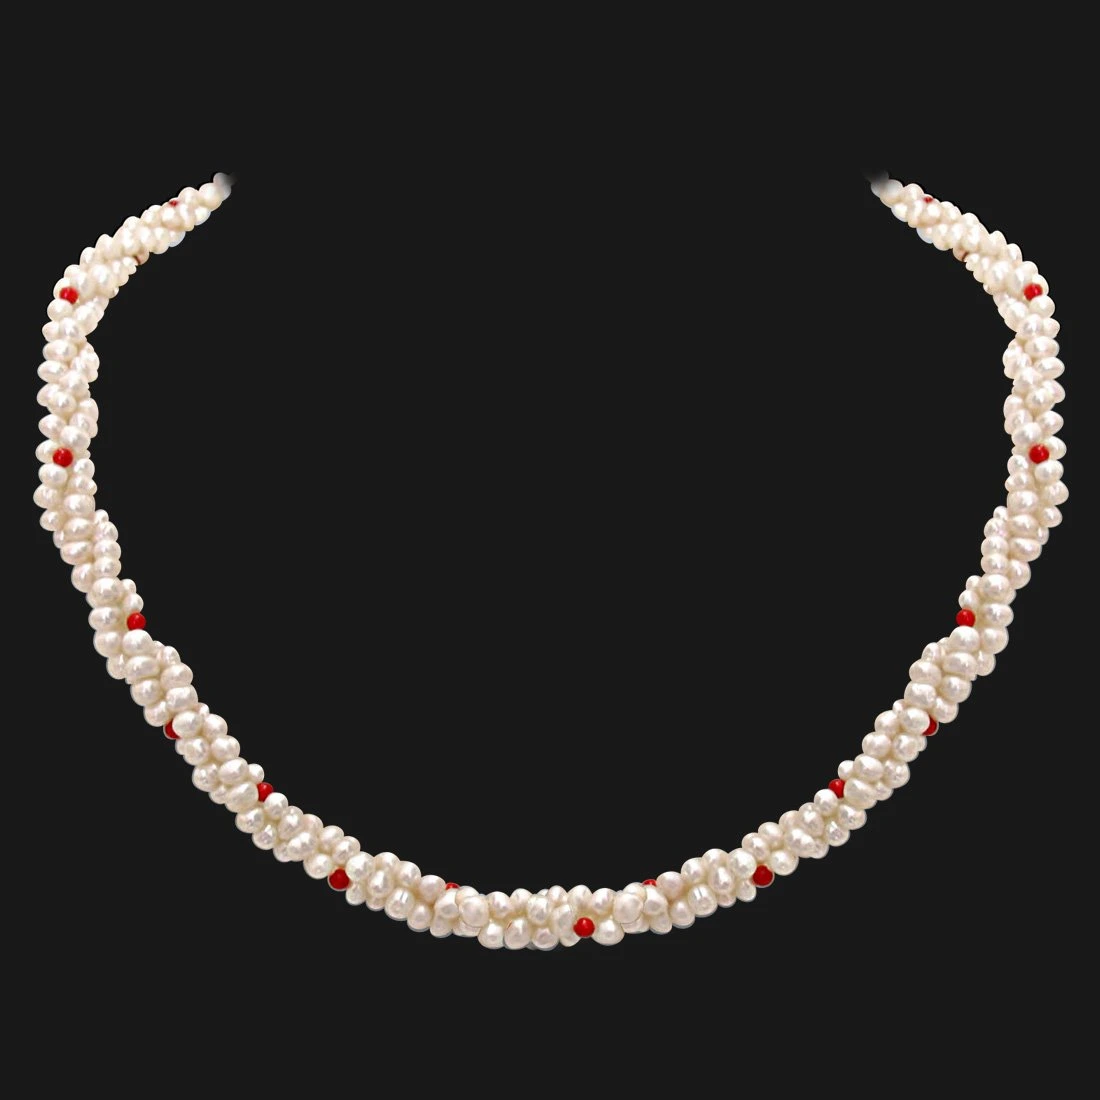 Coral Bead Beauty - 3 Line Twisted Real Pearl & Red Coral Beads Necklace for Women (SN303)